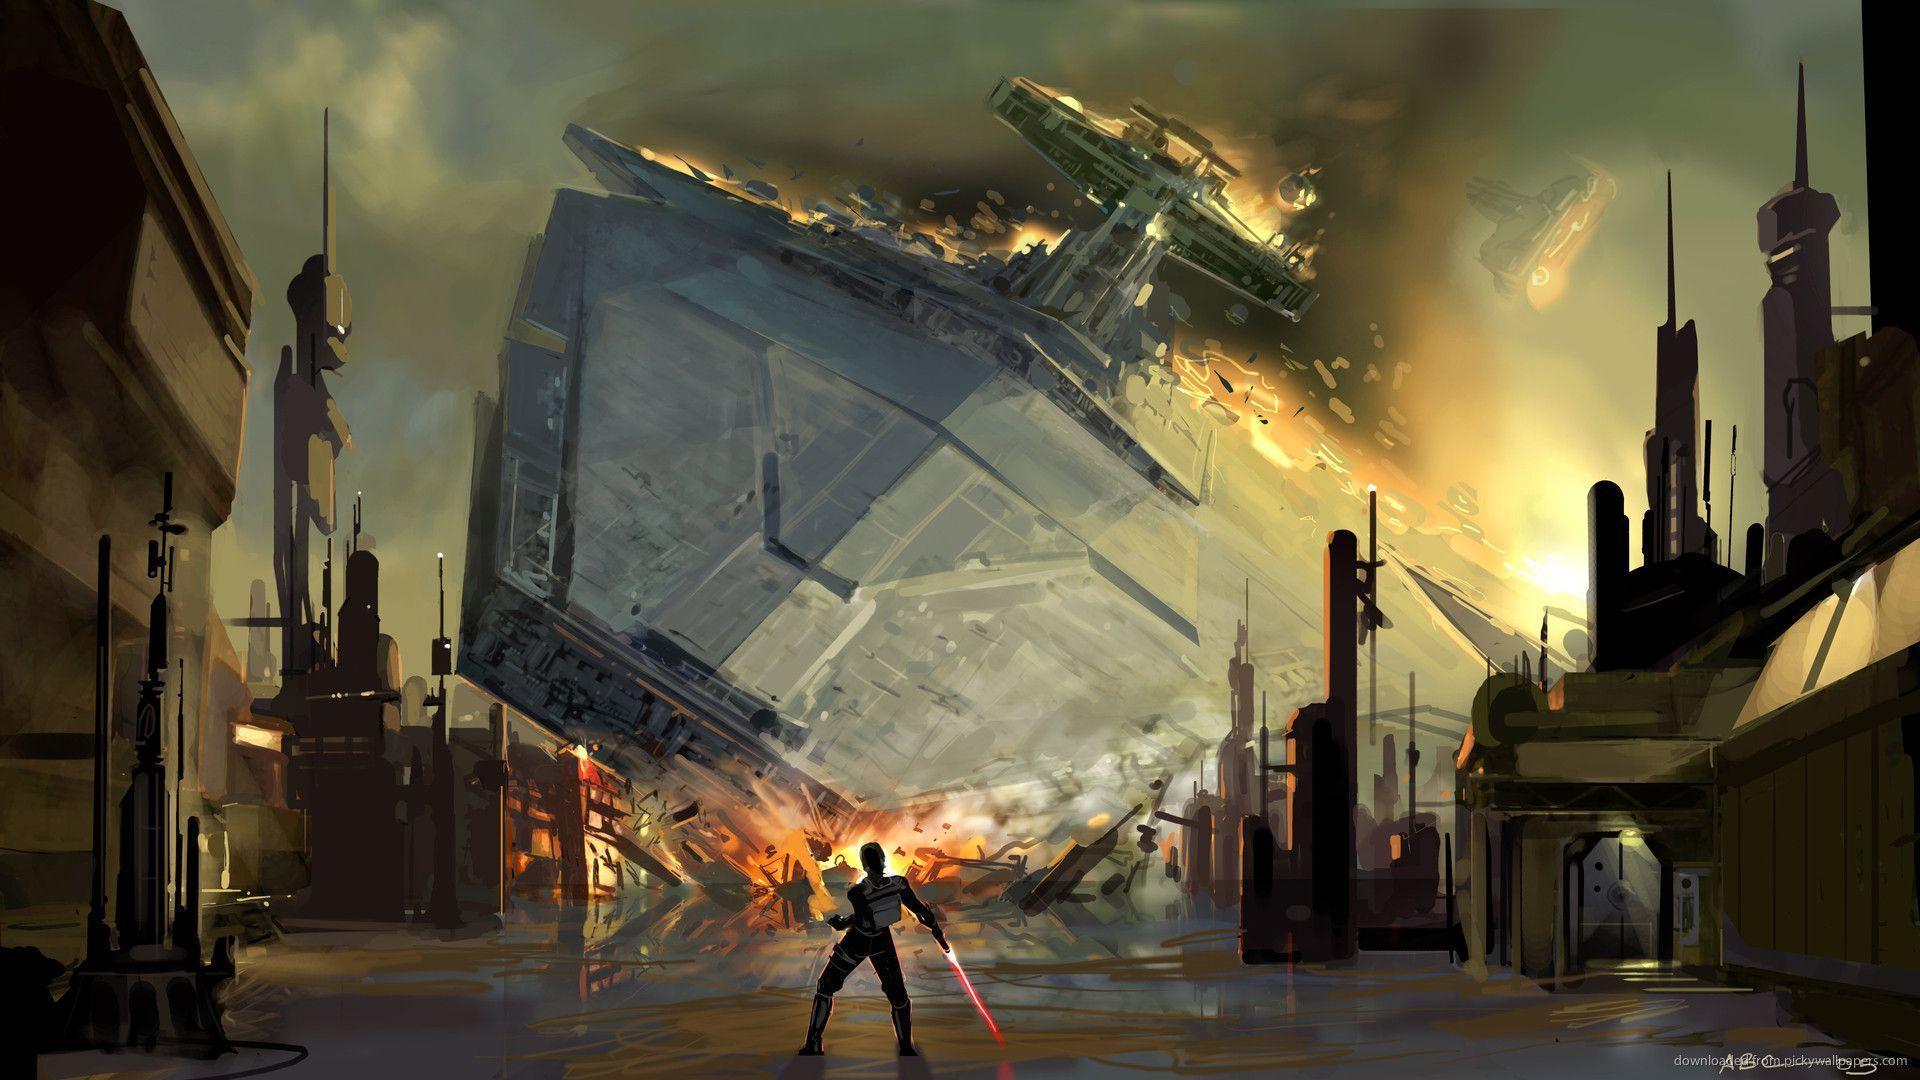 SWTFU Star Destroyer Force Pull Wallpaper For IPhone 3G 3GS